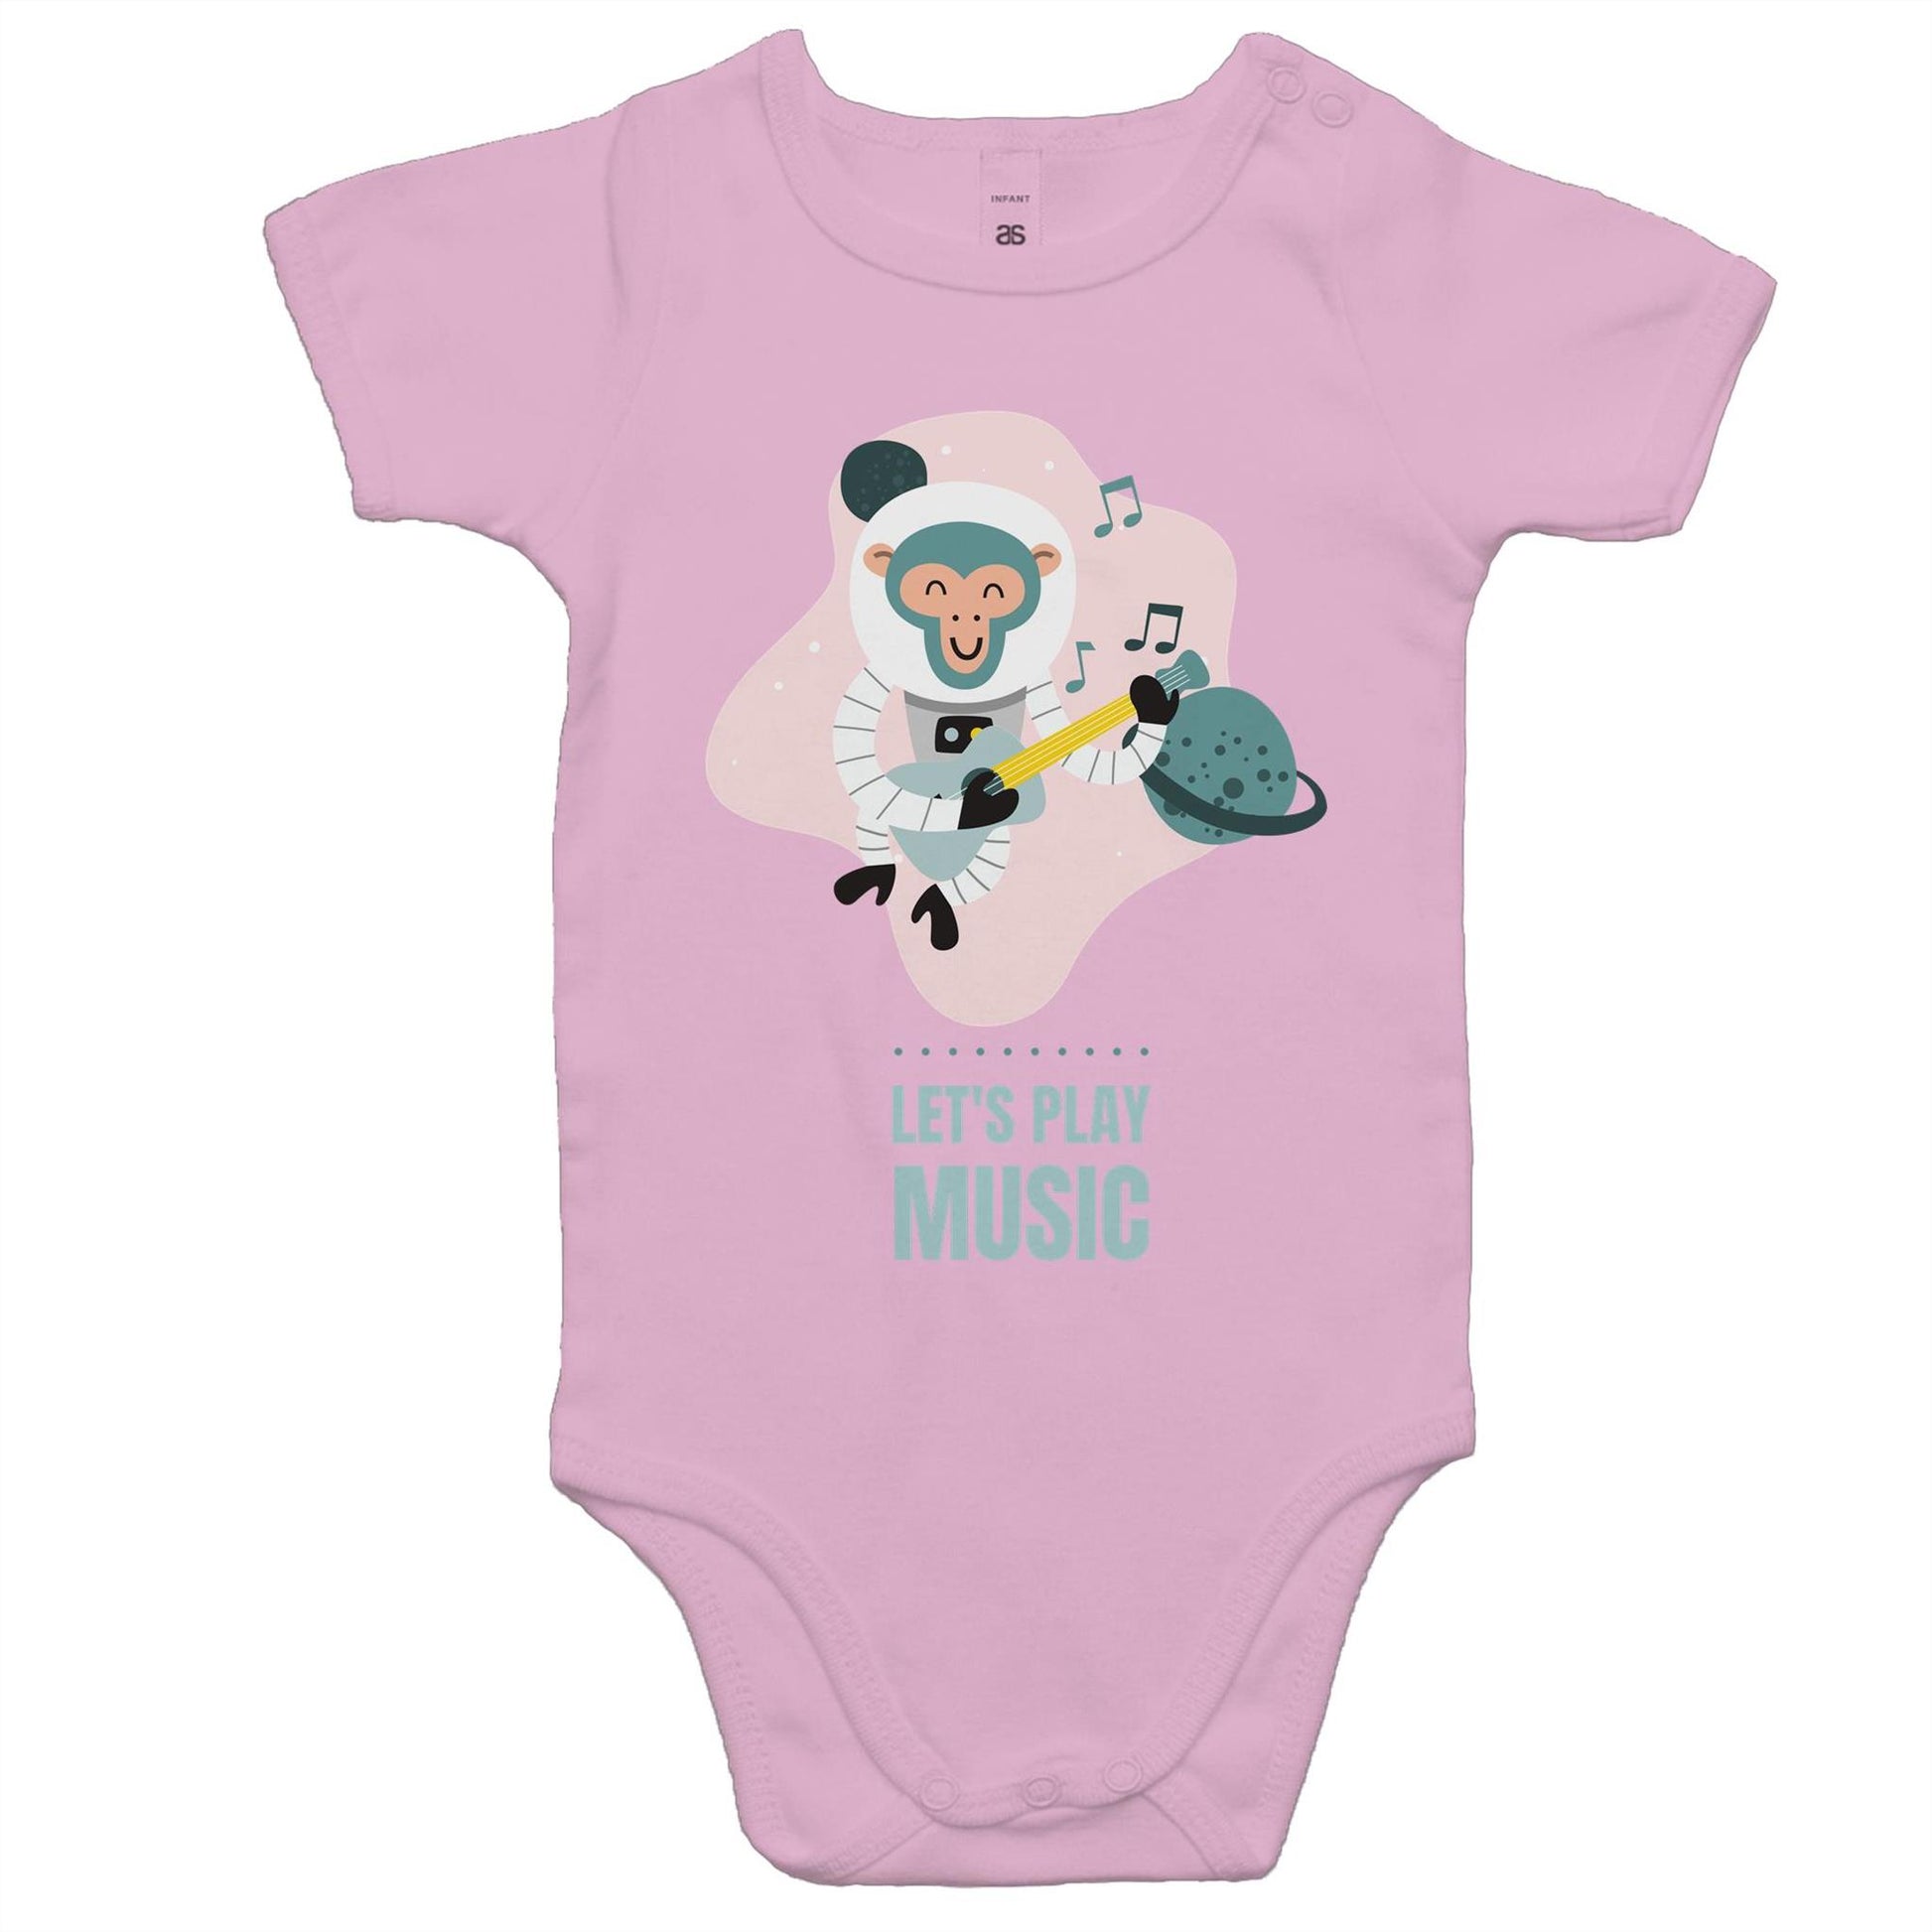 Let's Play Music - Baby Bodysuit Pink Baby Bodysuit animal Dad Music Space